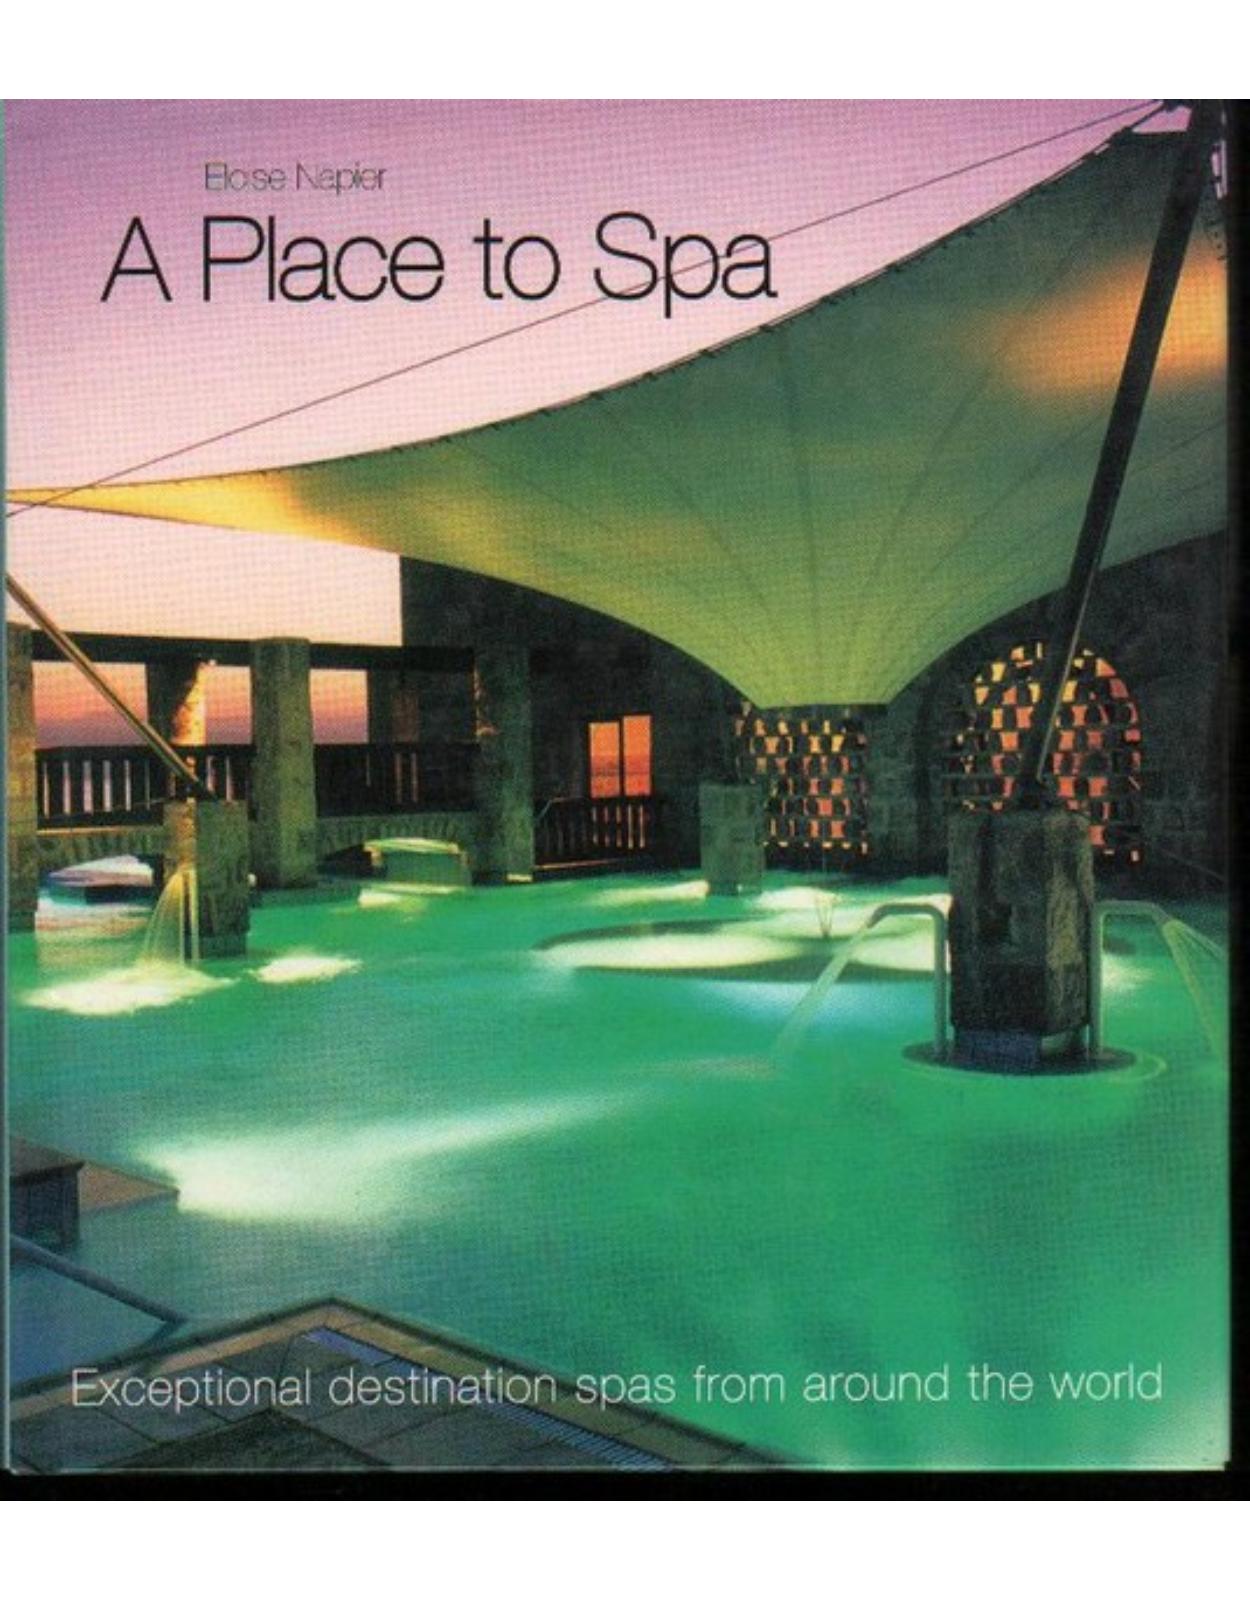 A PLACE TO SPA